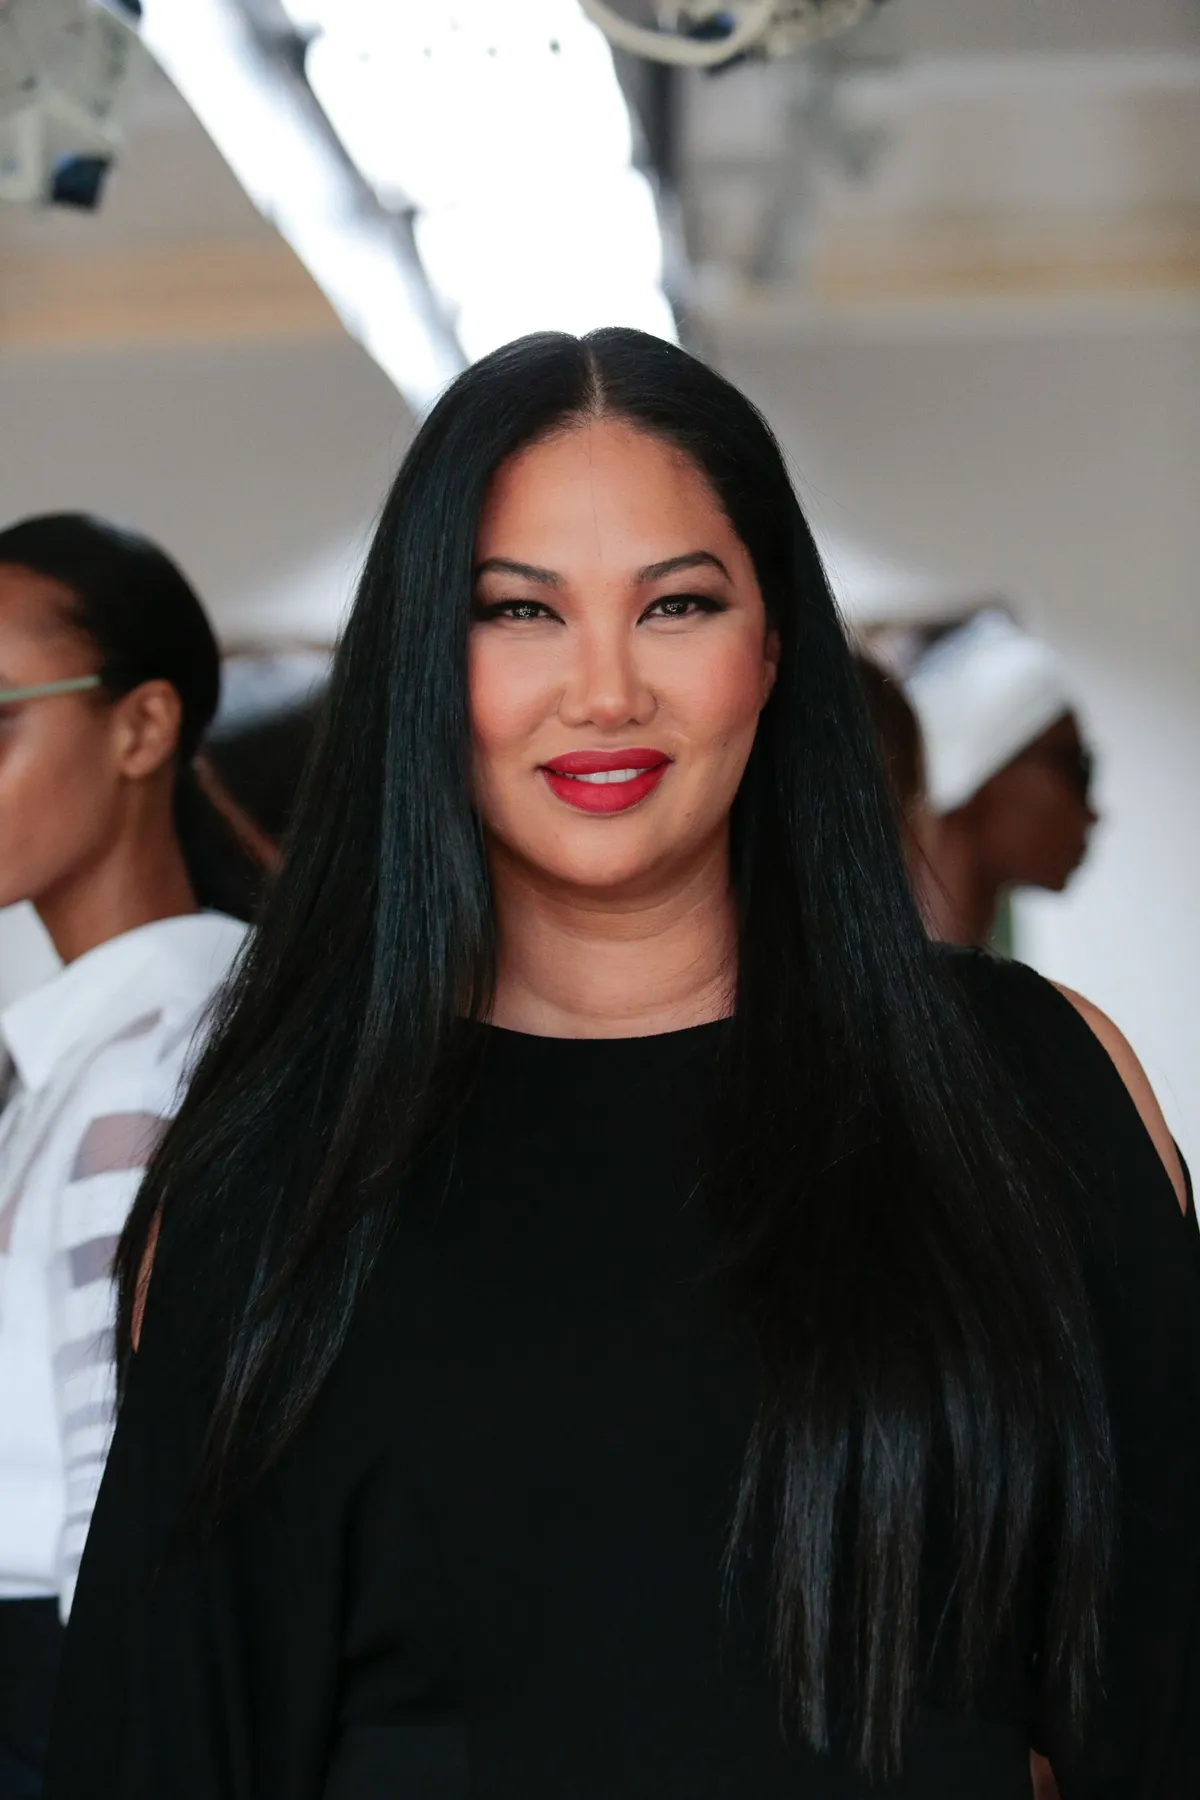 Kimora Lee Simmons during New York Fashion Week at The Gallery, Skylight at Clarkson Square on September 14, 2016 | Photo: Getty Images